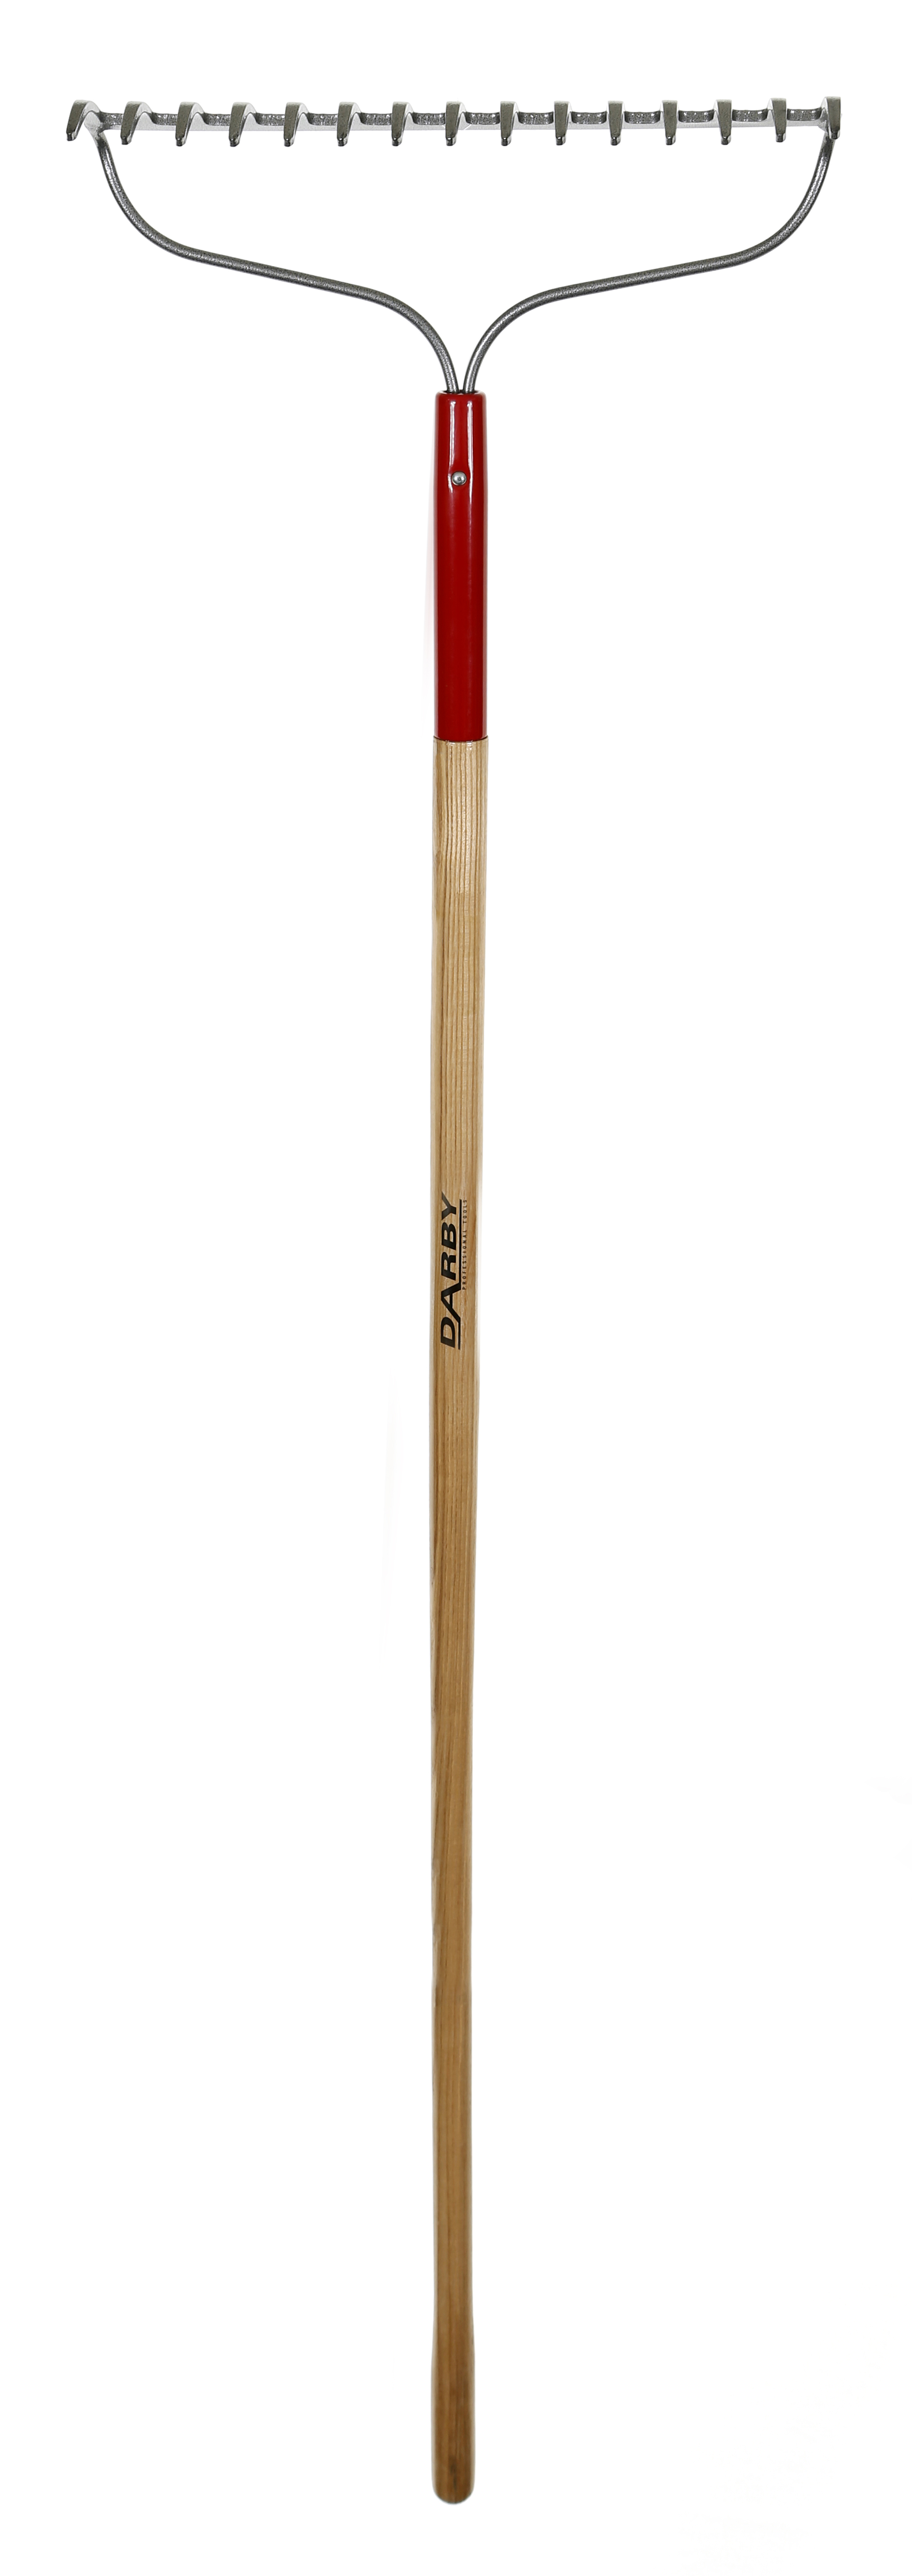 Darby Bow Rake 15 Tooth Wooden Handle